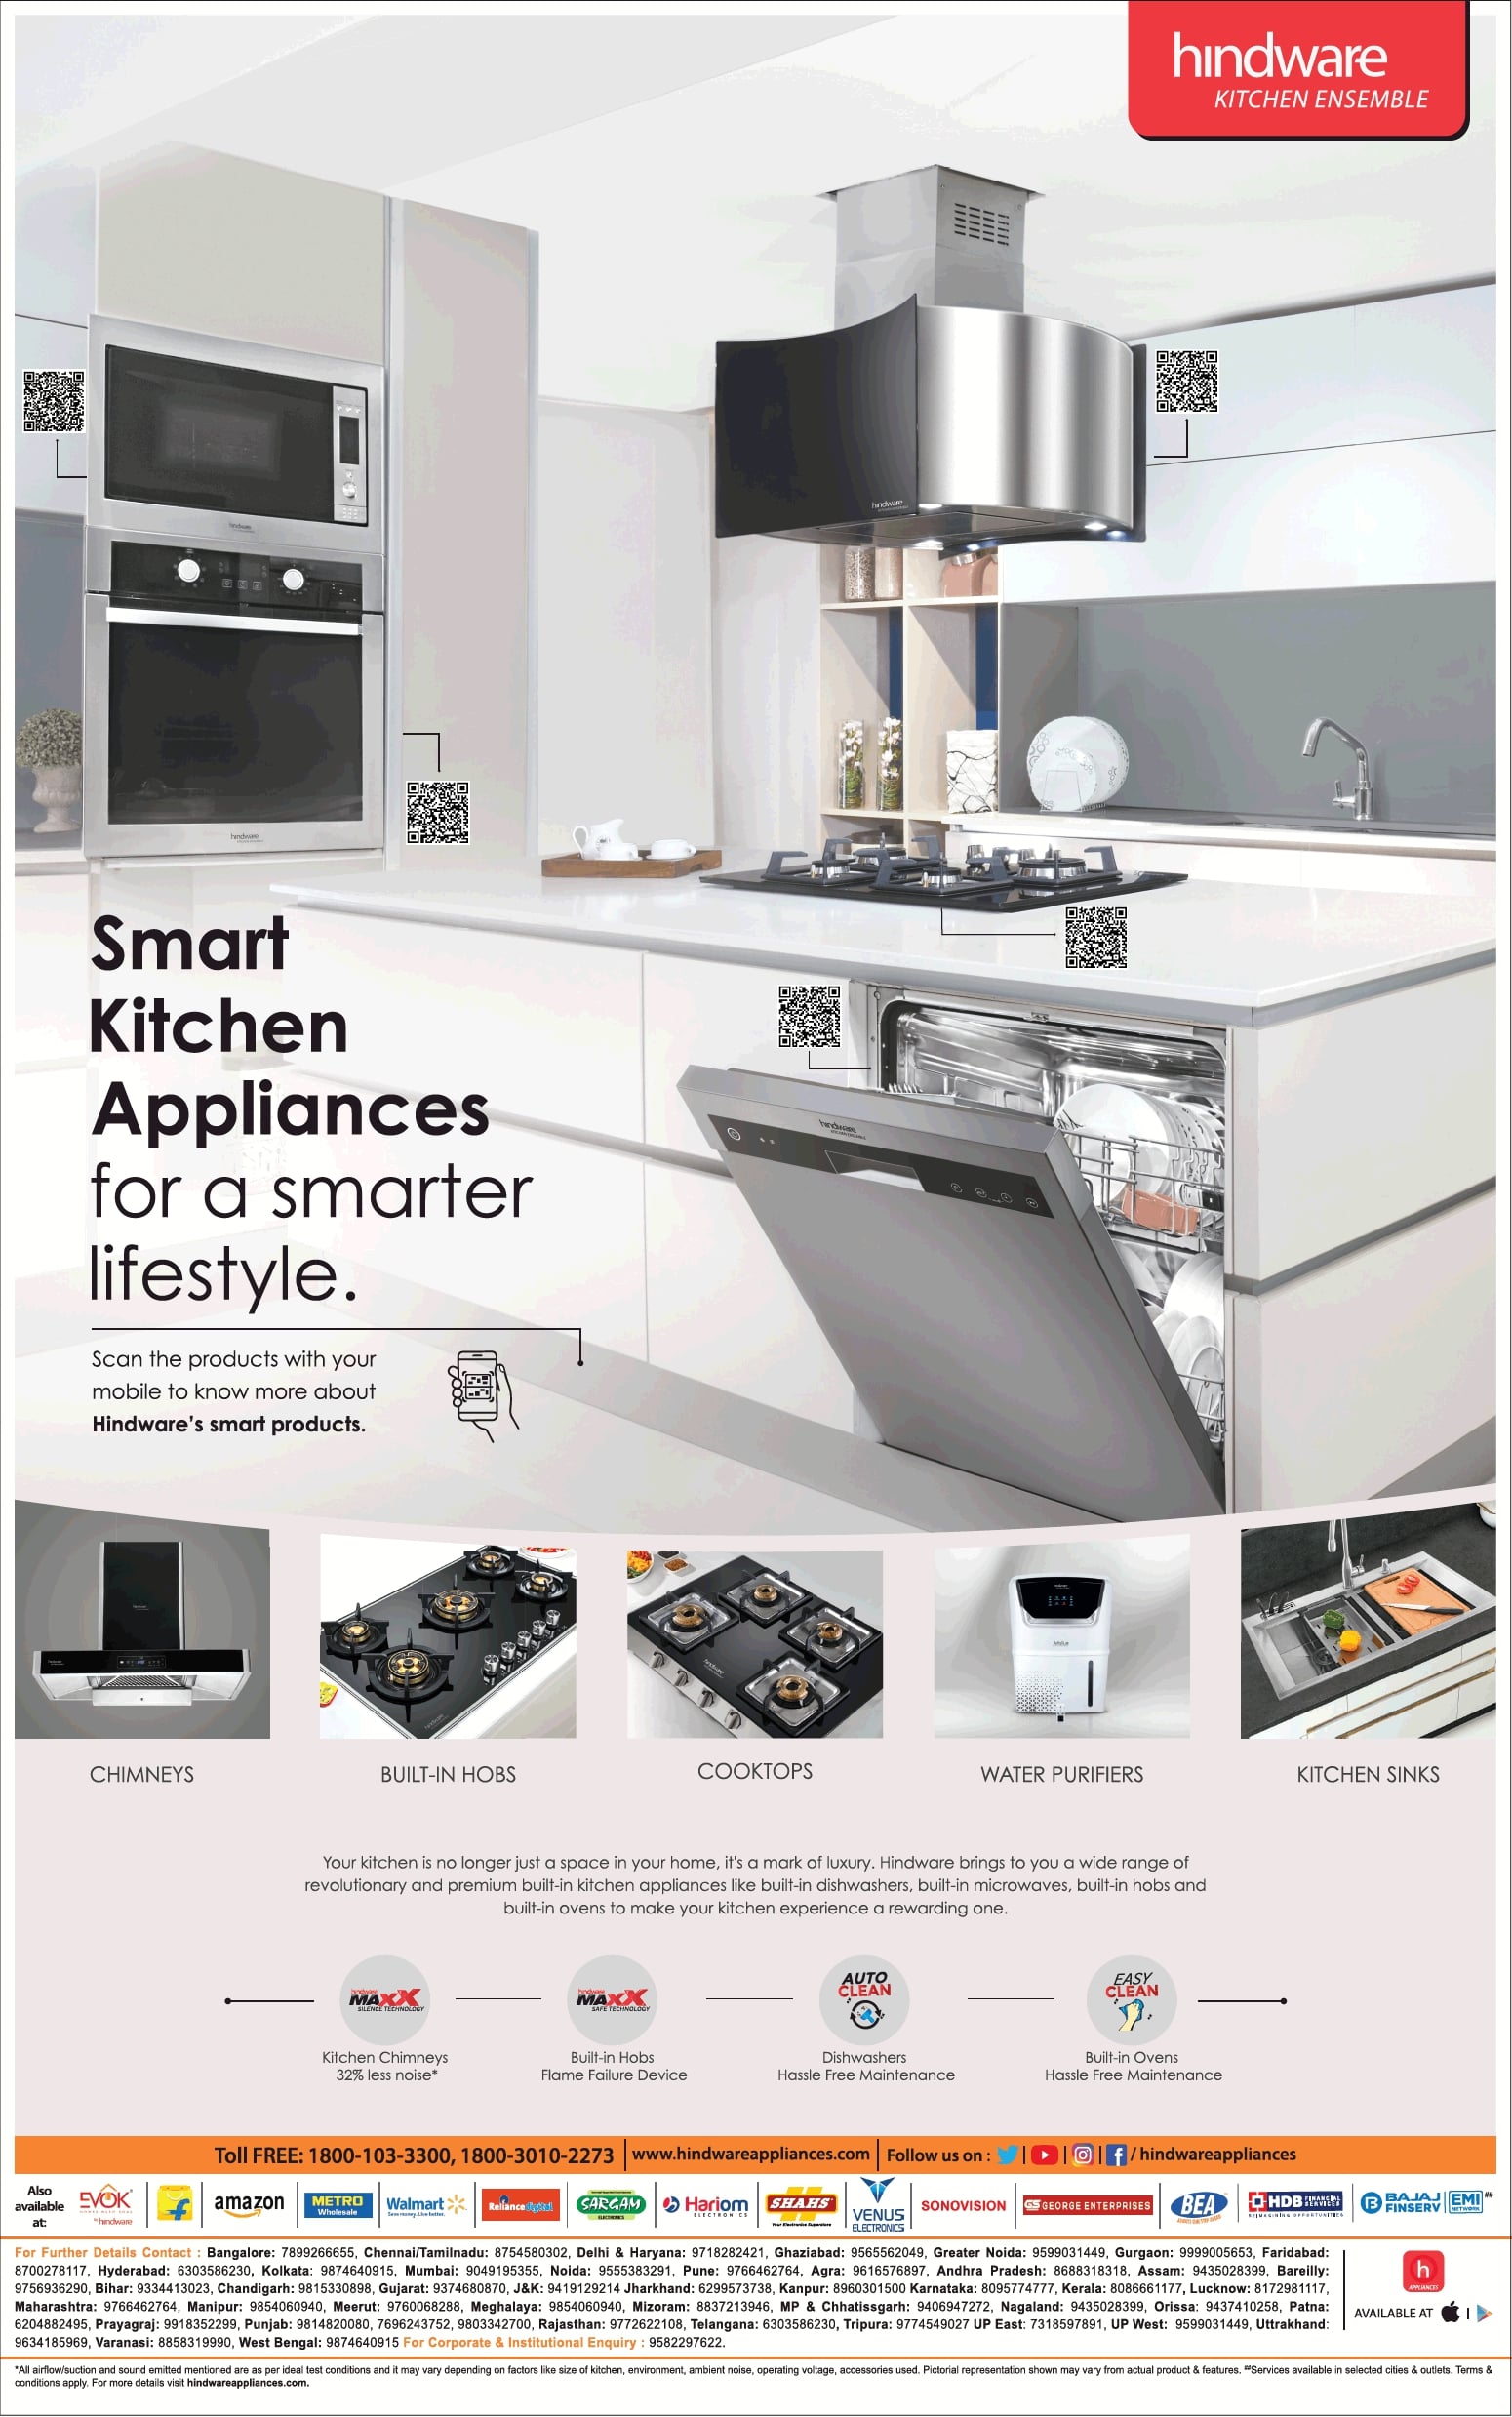 hindware-smart-kitchen-appliances-for-a-smarter-lifestyle-ad-times-of-india-mumbai-09-01-2021